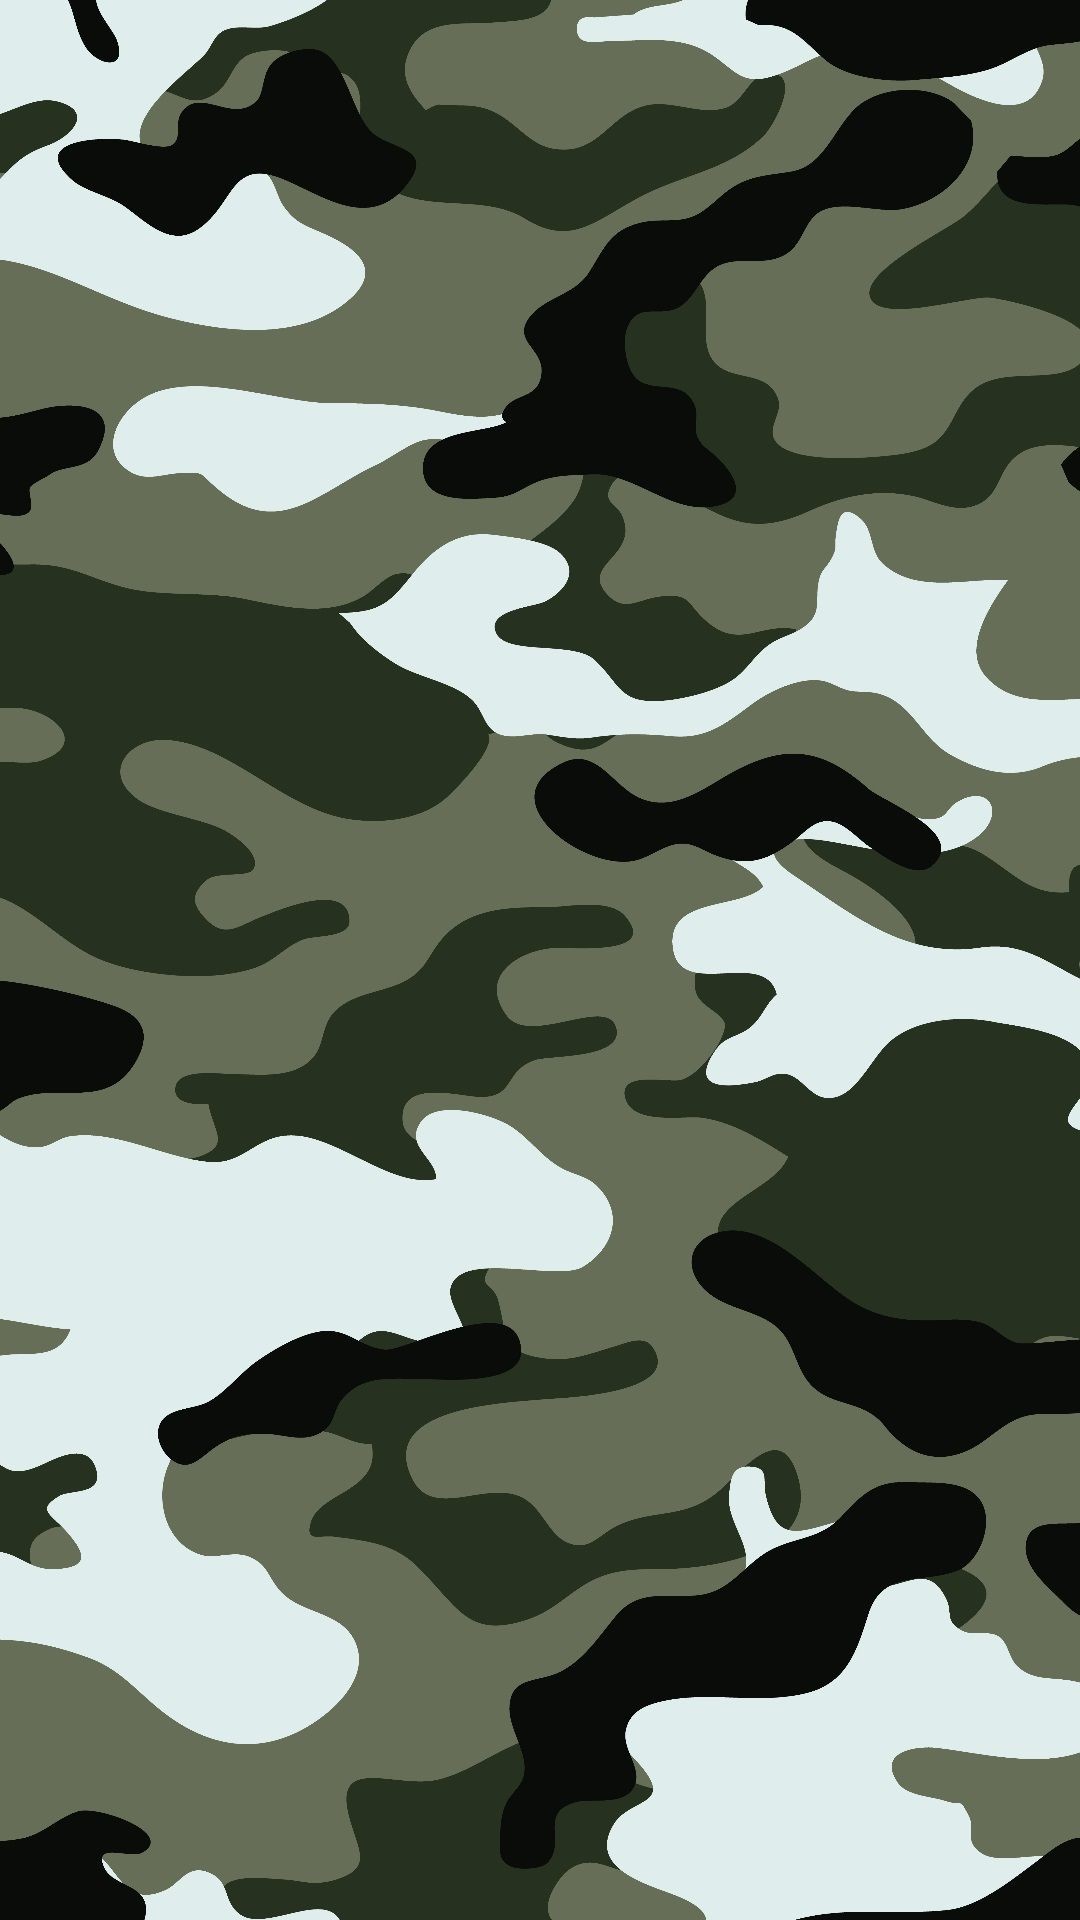 1080x1920, Camouflage Wallpaper For Iphone Or Android - Army Print Wallpaper  Hd - 1080x1920 Wallpaper 